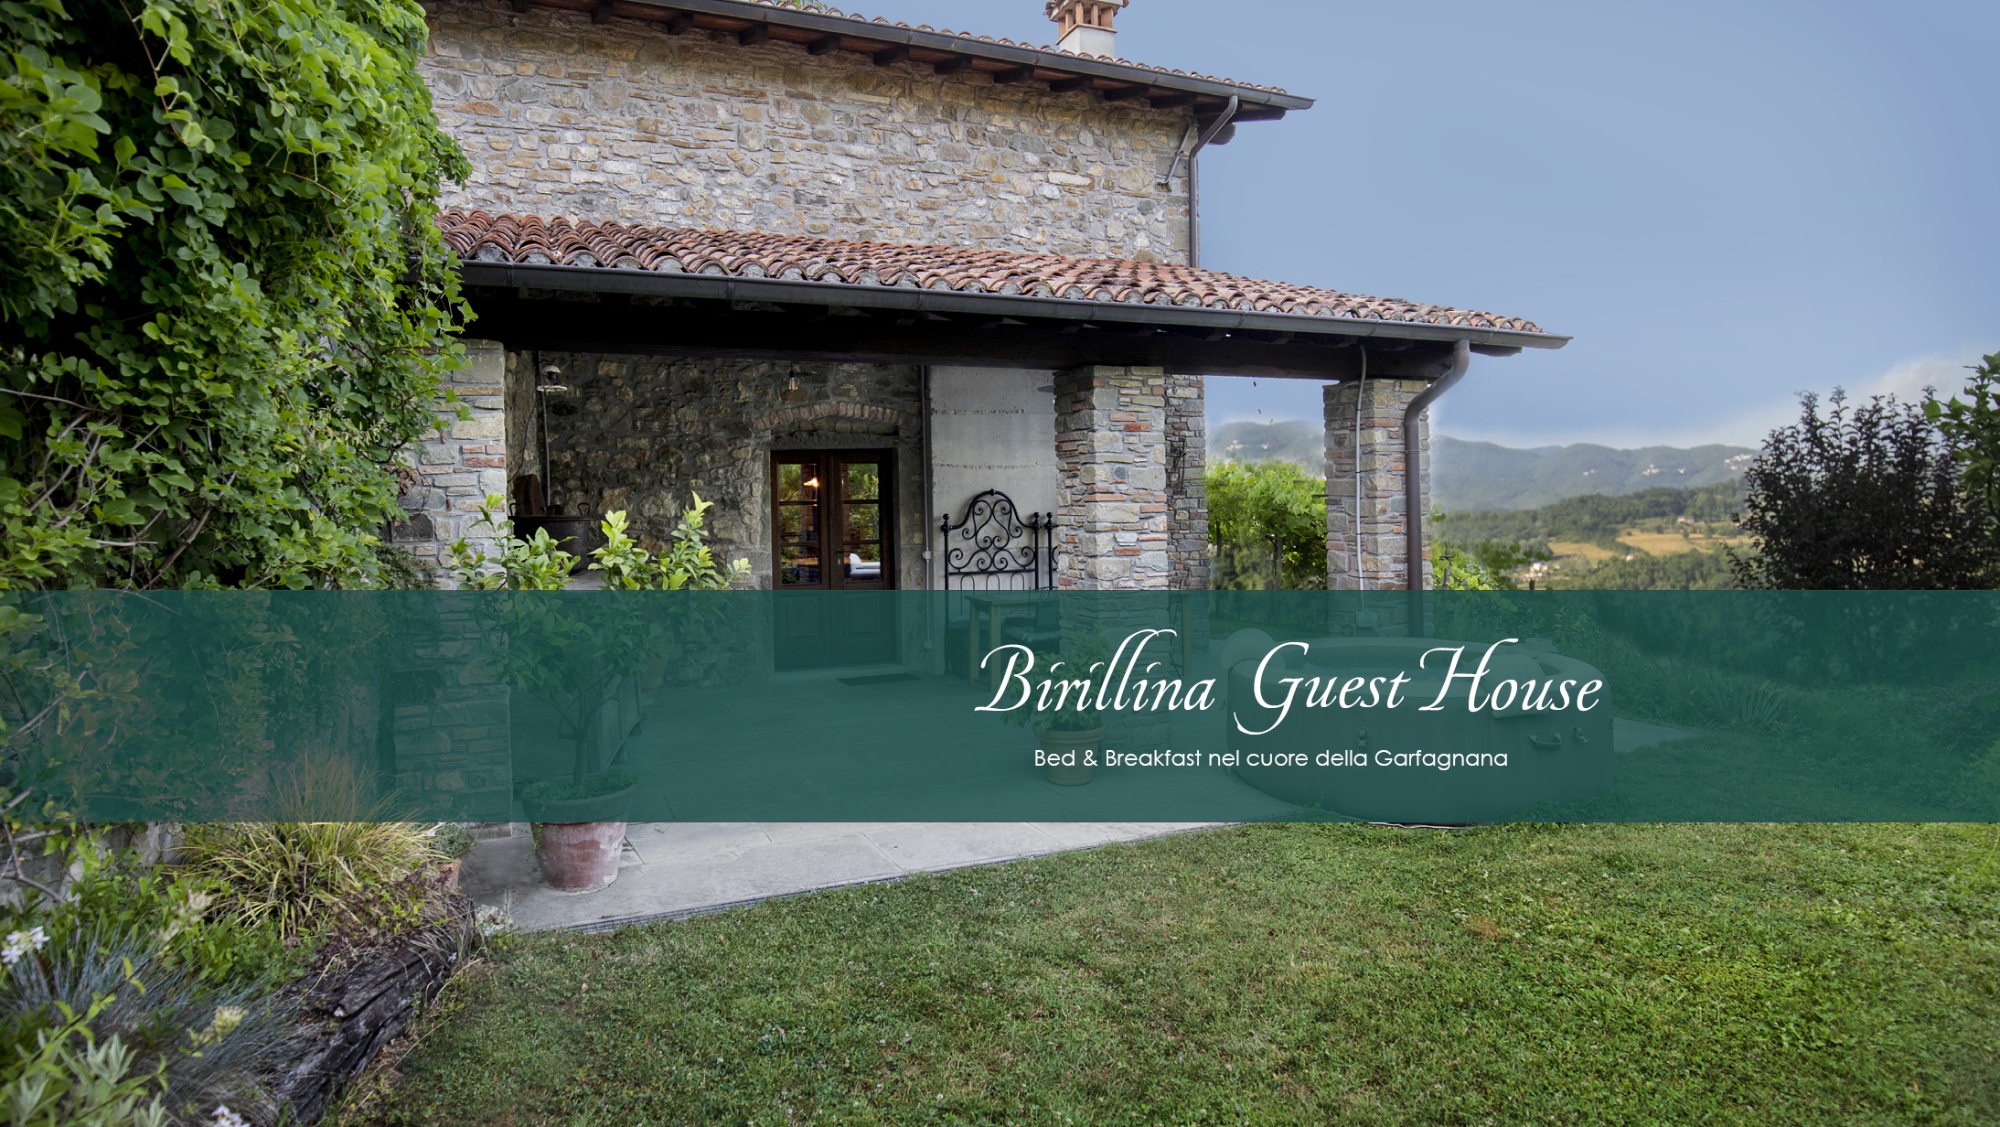 Birillina Guest House nearby Lucca